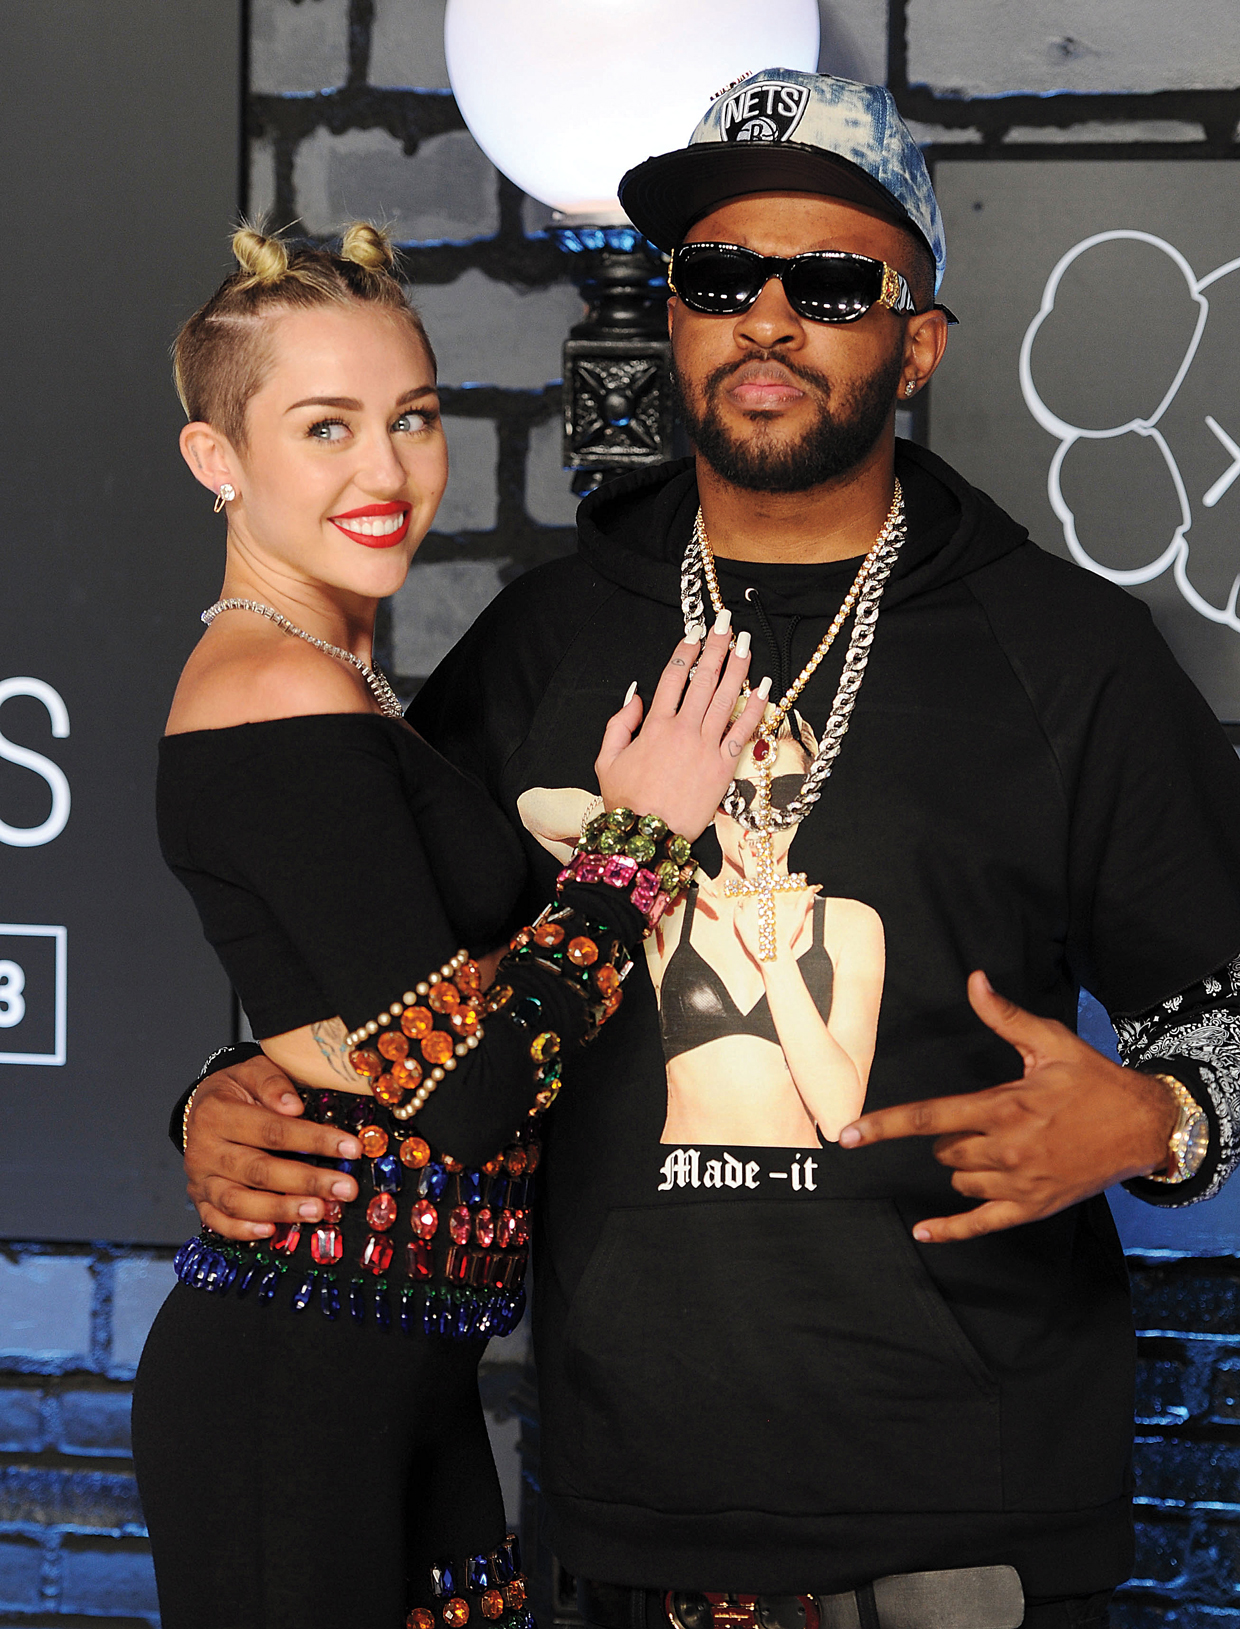 Miley-Cyrus-and-Mike-Will-Made-2013-vma-billboard-1240.jpg